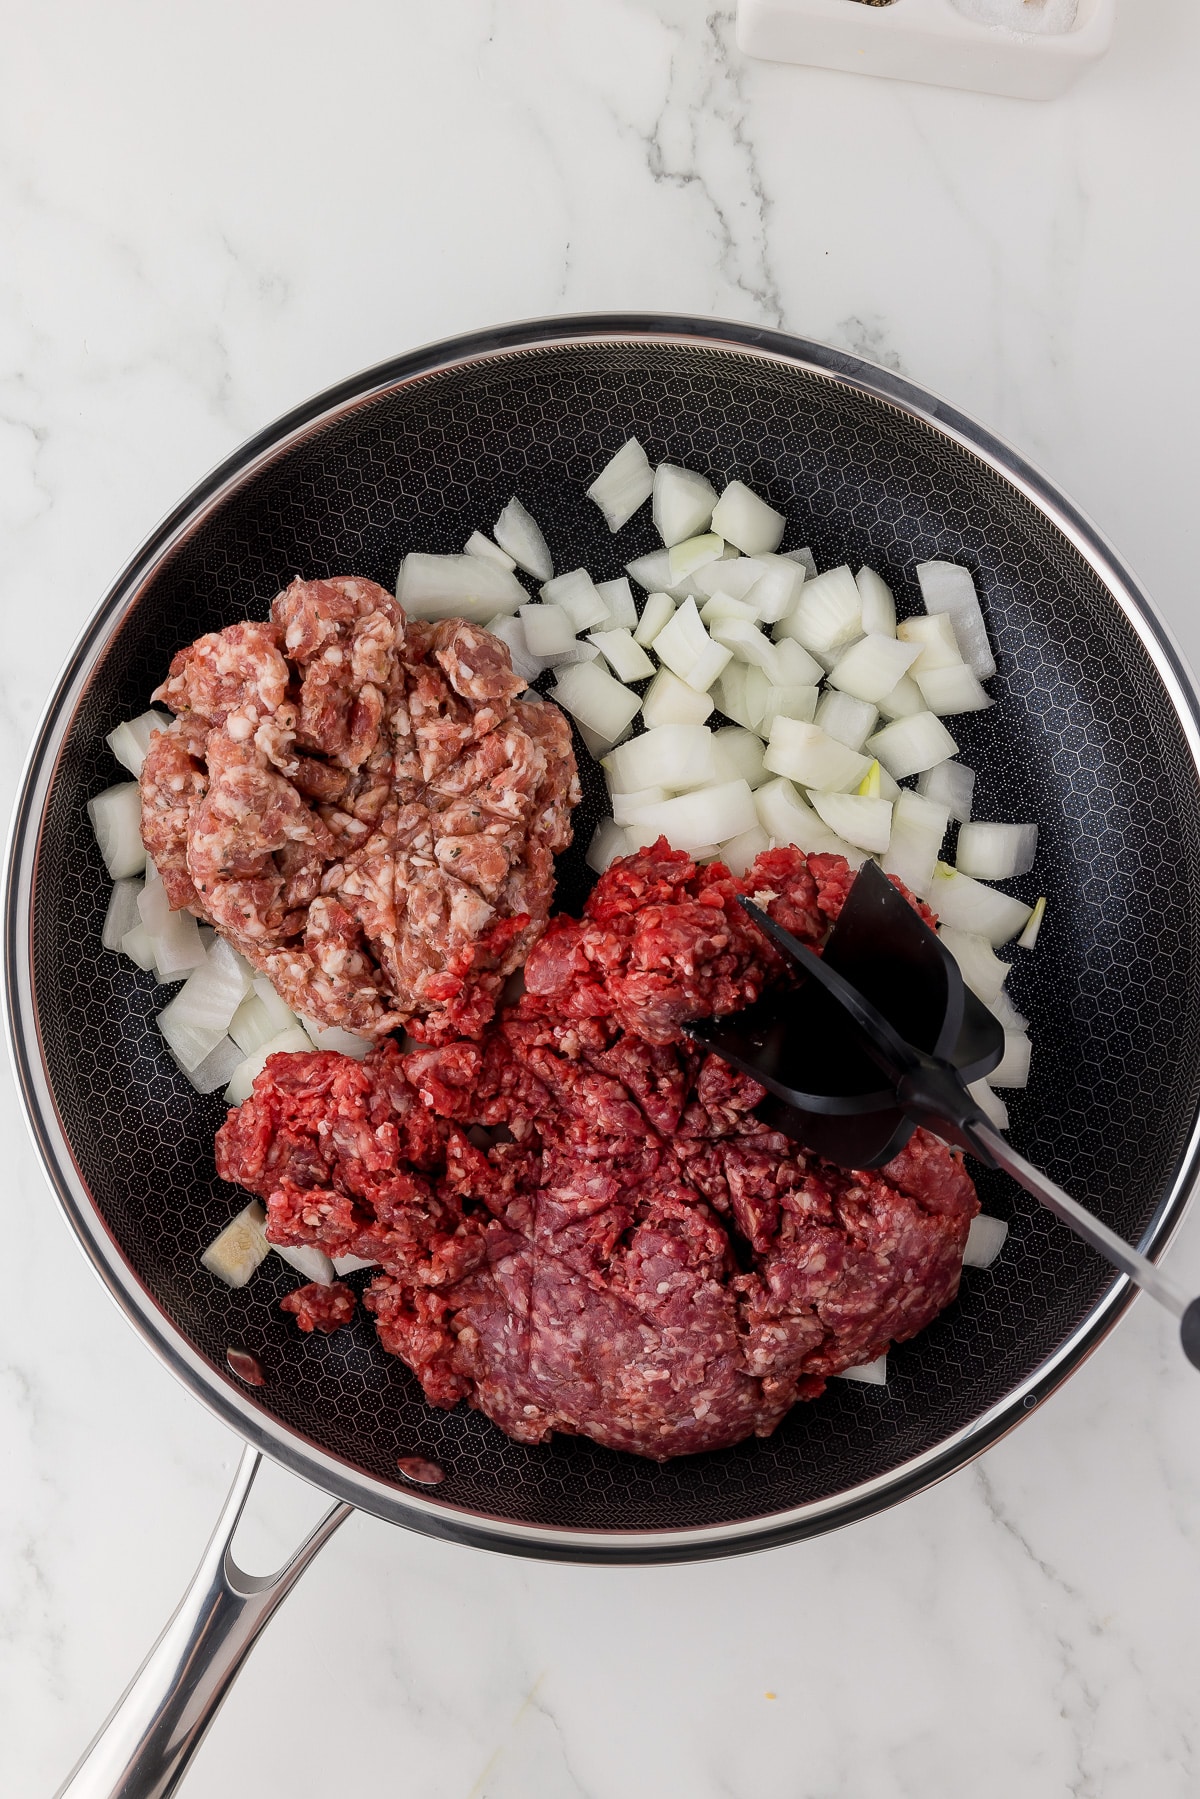 Raw ground meat, ground sausage, chopped onions in a Gordon Ramsay hexclad pan on a white marble countertop.